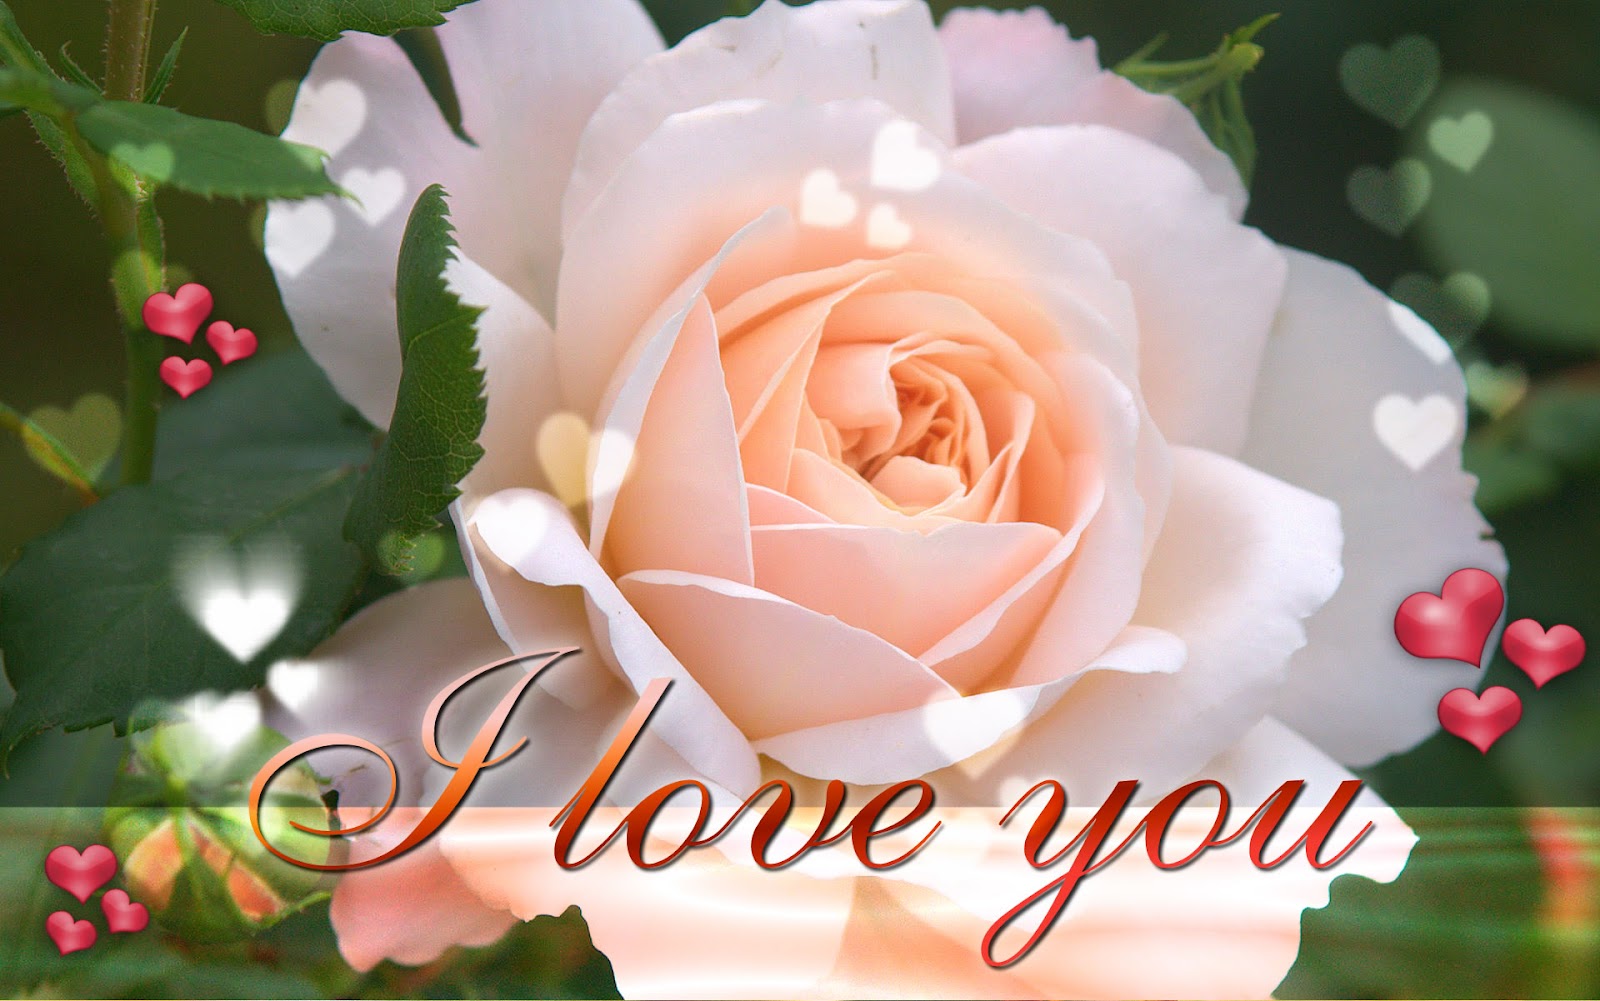 Funny Pictures Gallery: Love roses wallpapers, love rose flower ...